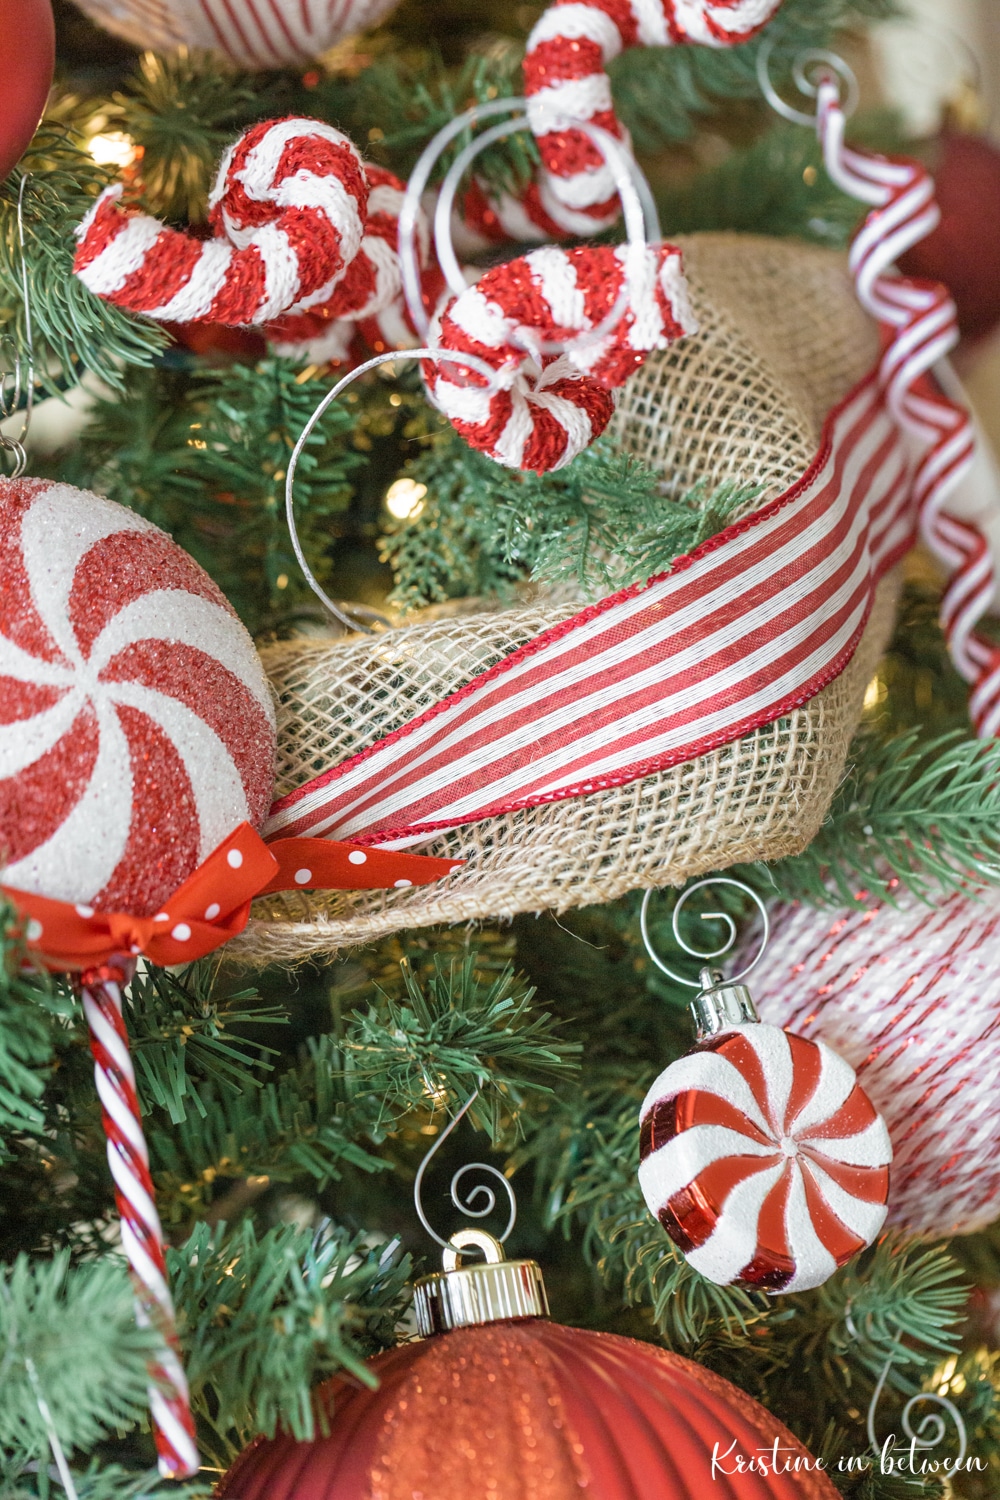 Burlap and ribbon wrapped around a Christmas tree.